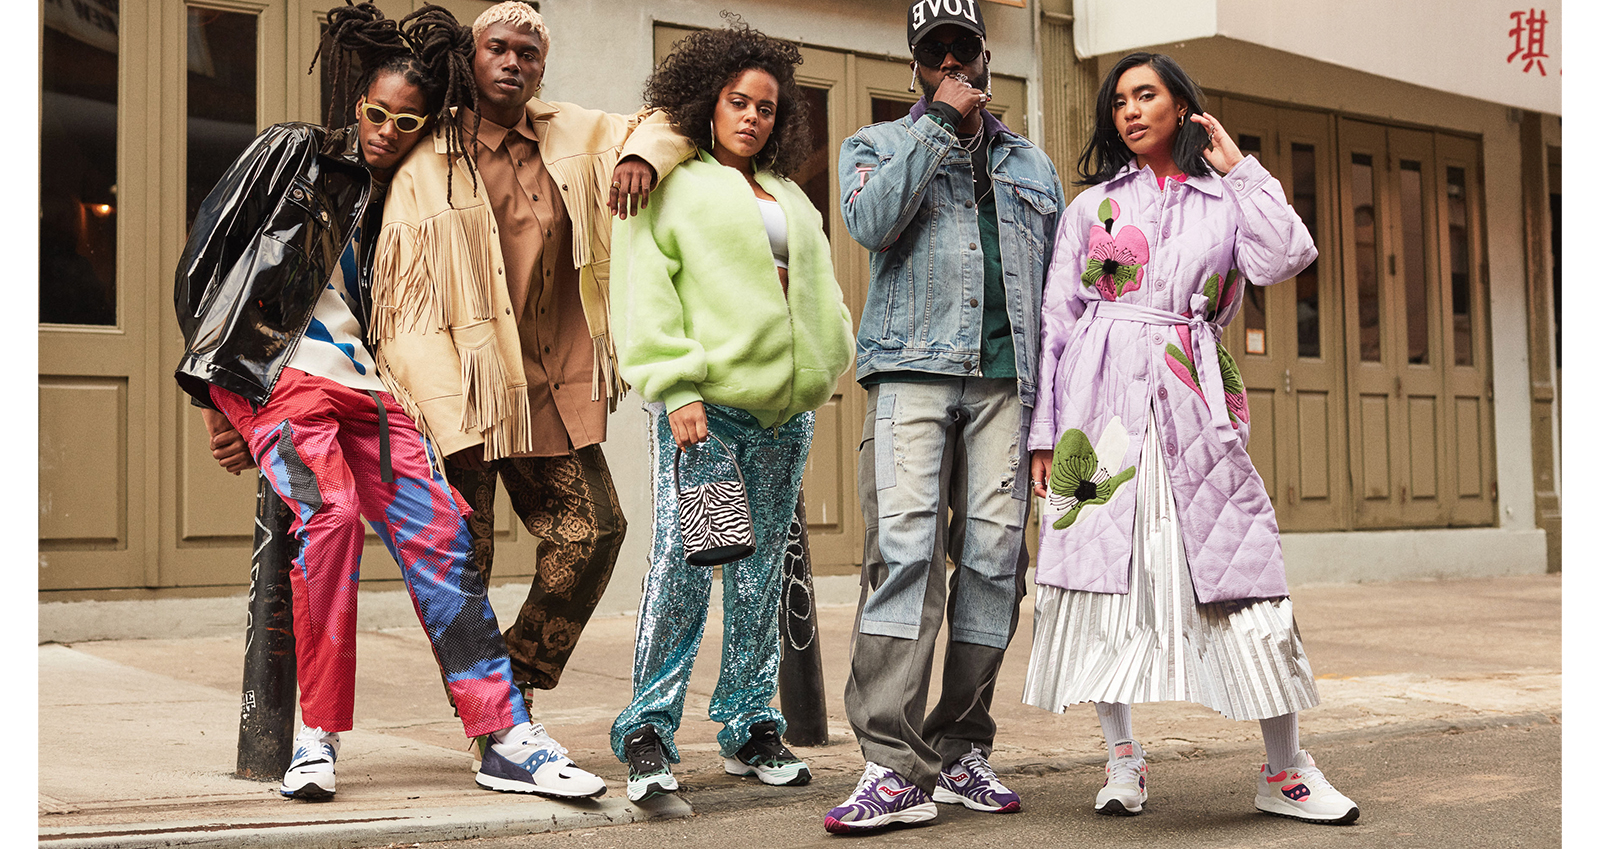 High Snobiety Featured NYC creatives lined up showing off their styles.